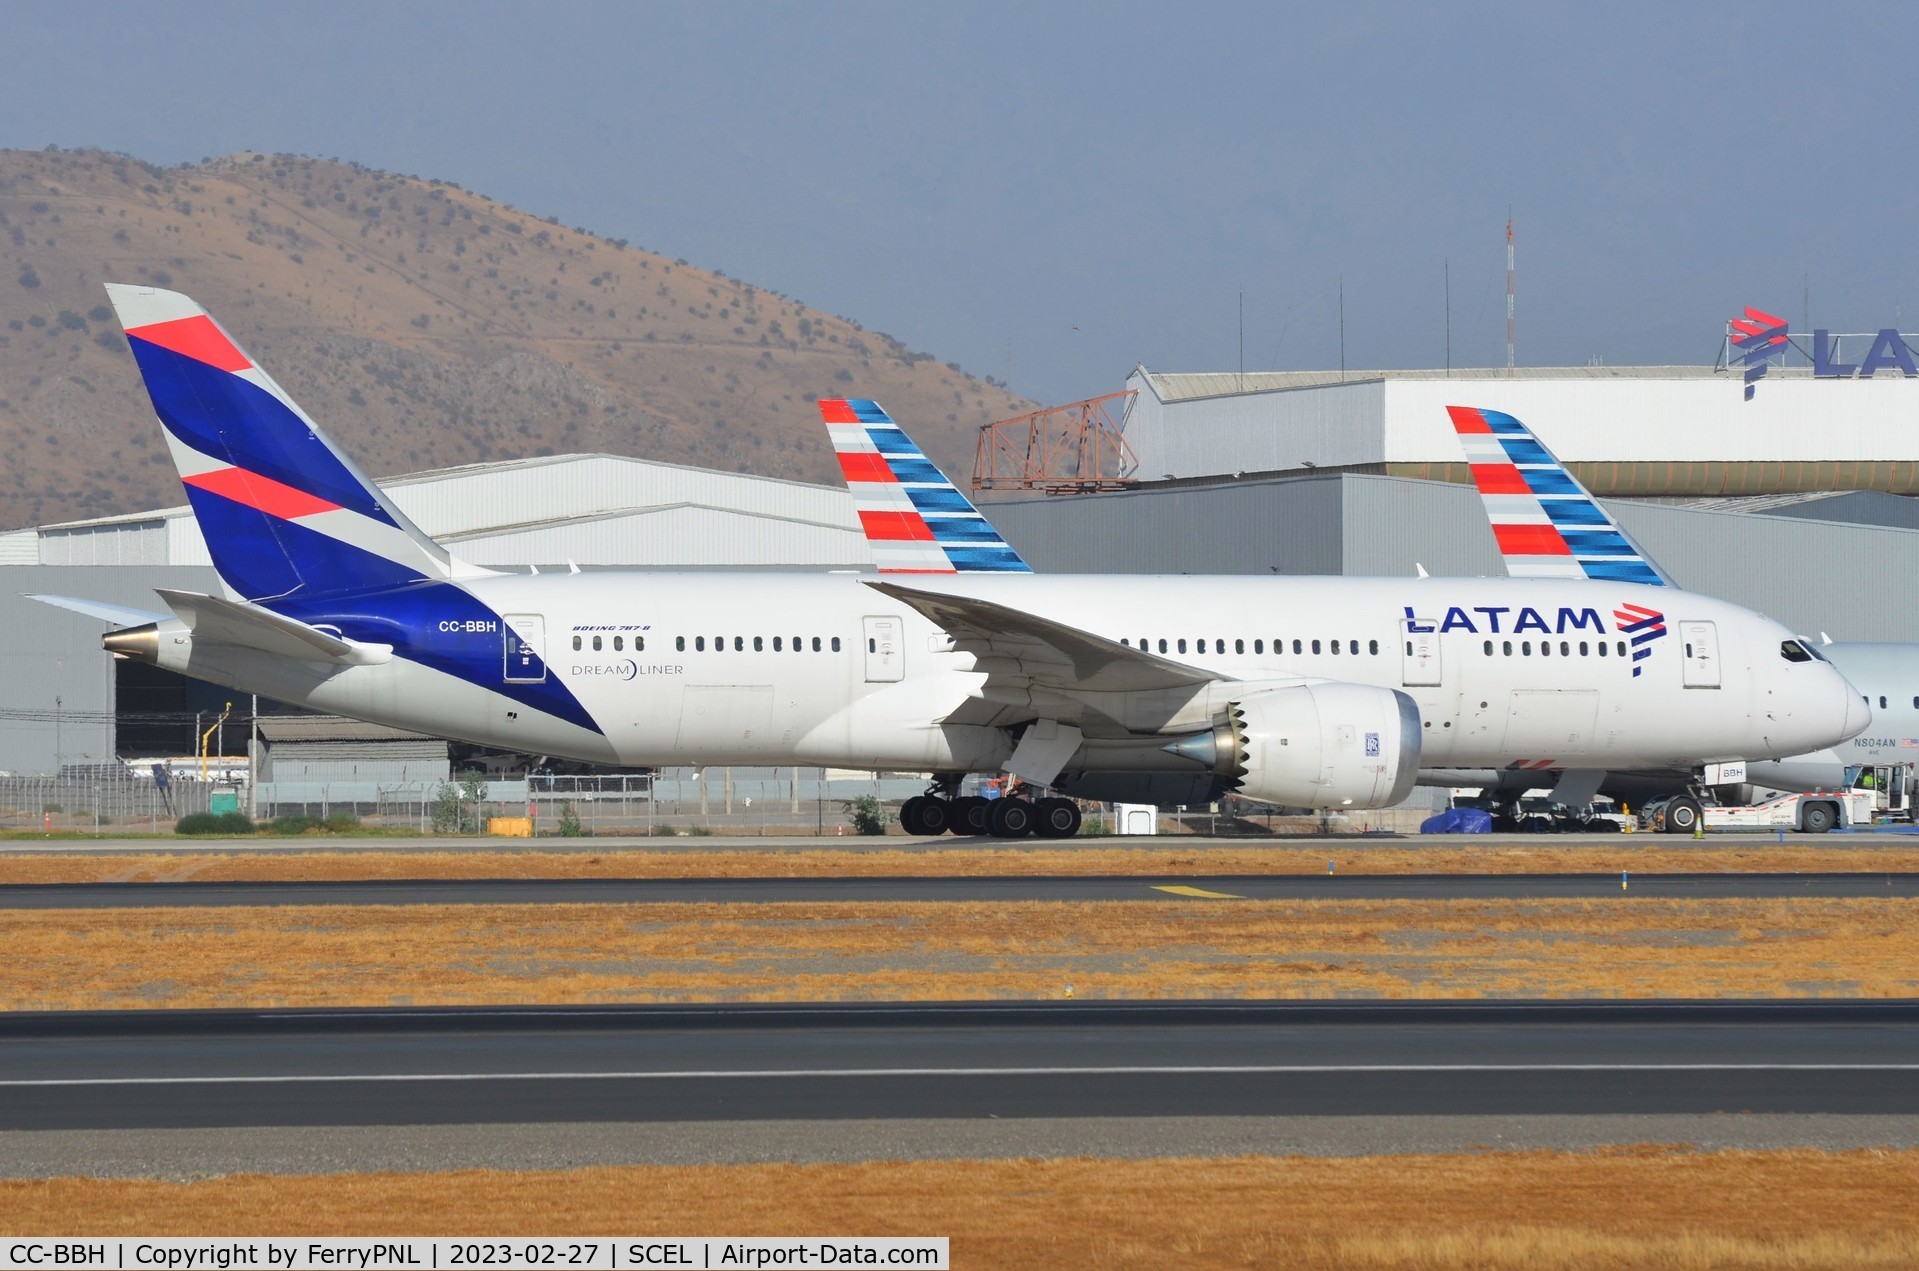 CC-BBH, 2014 Boeing 787-8 Dreamliner C/N 42224, Latam B788 under tow from the maintance area